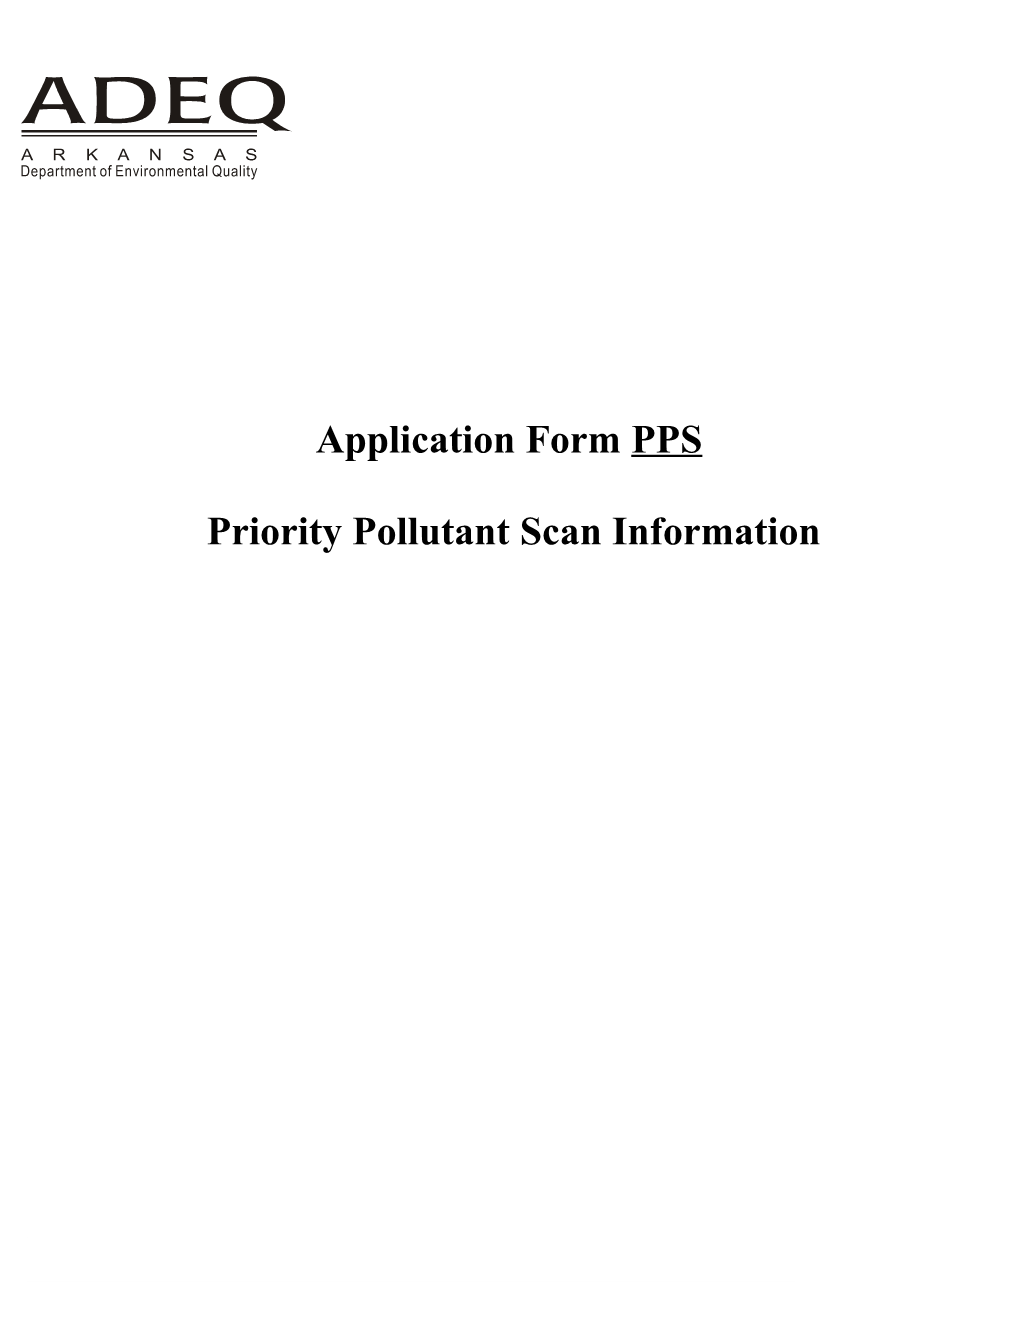 Priority Pollutant Scan Information